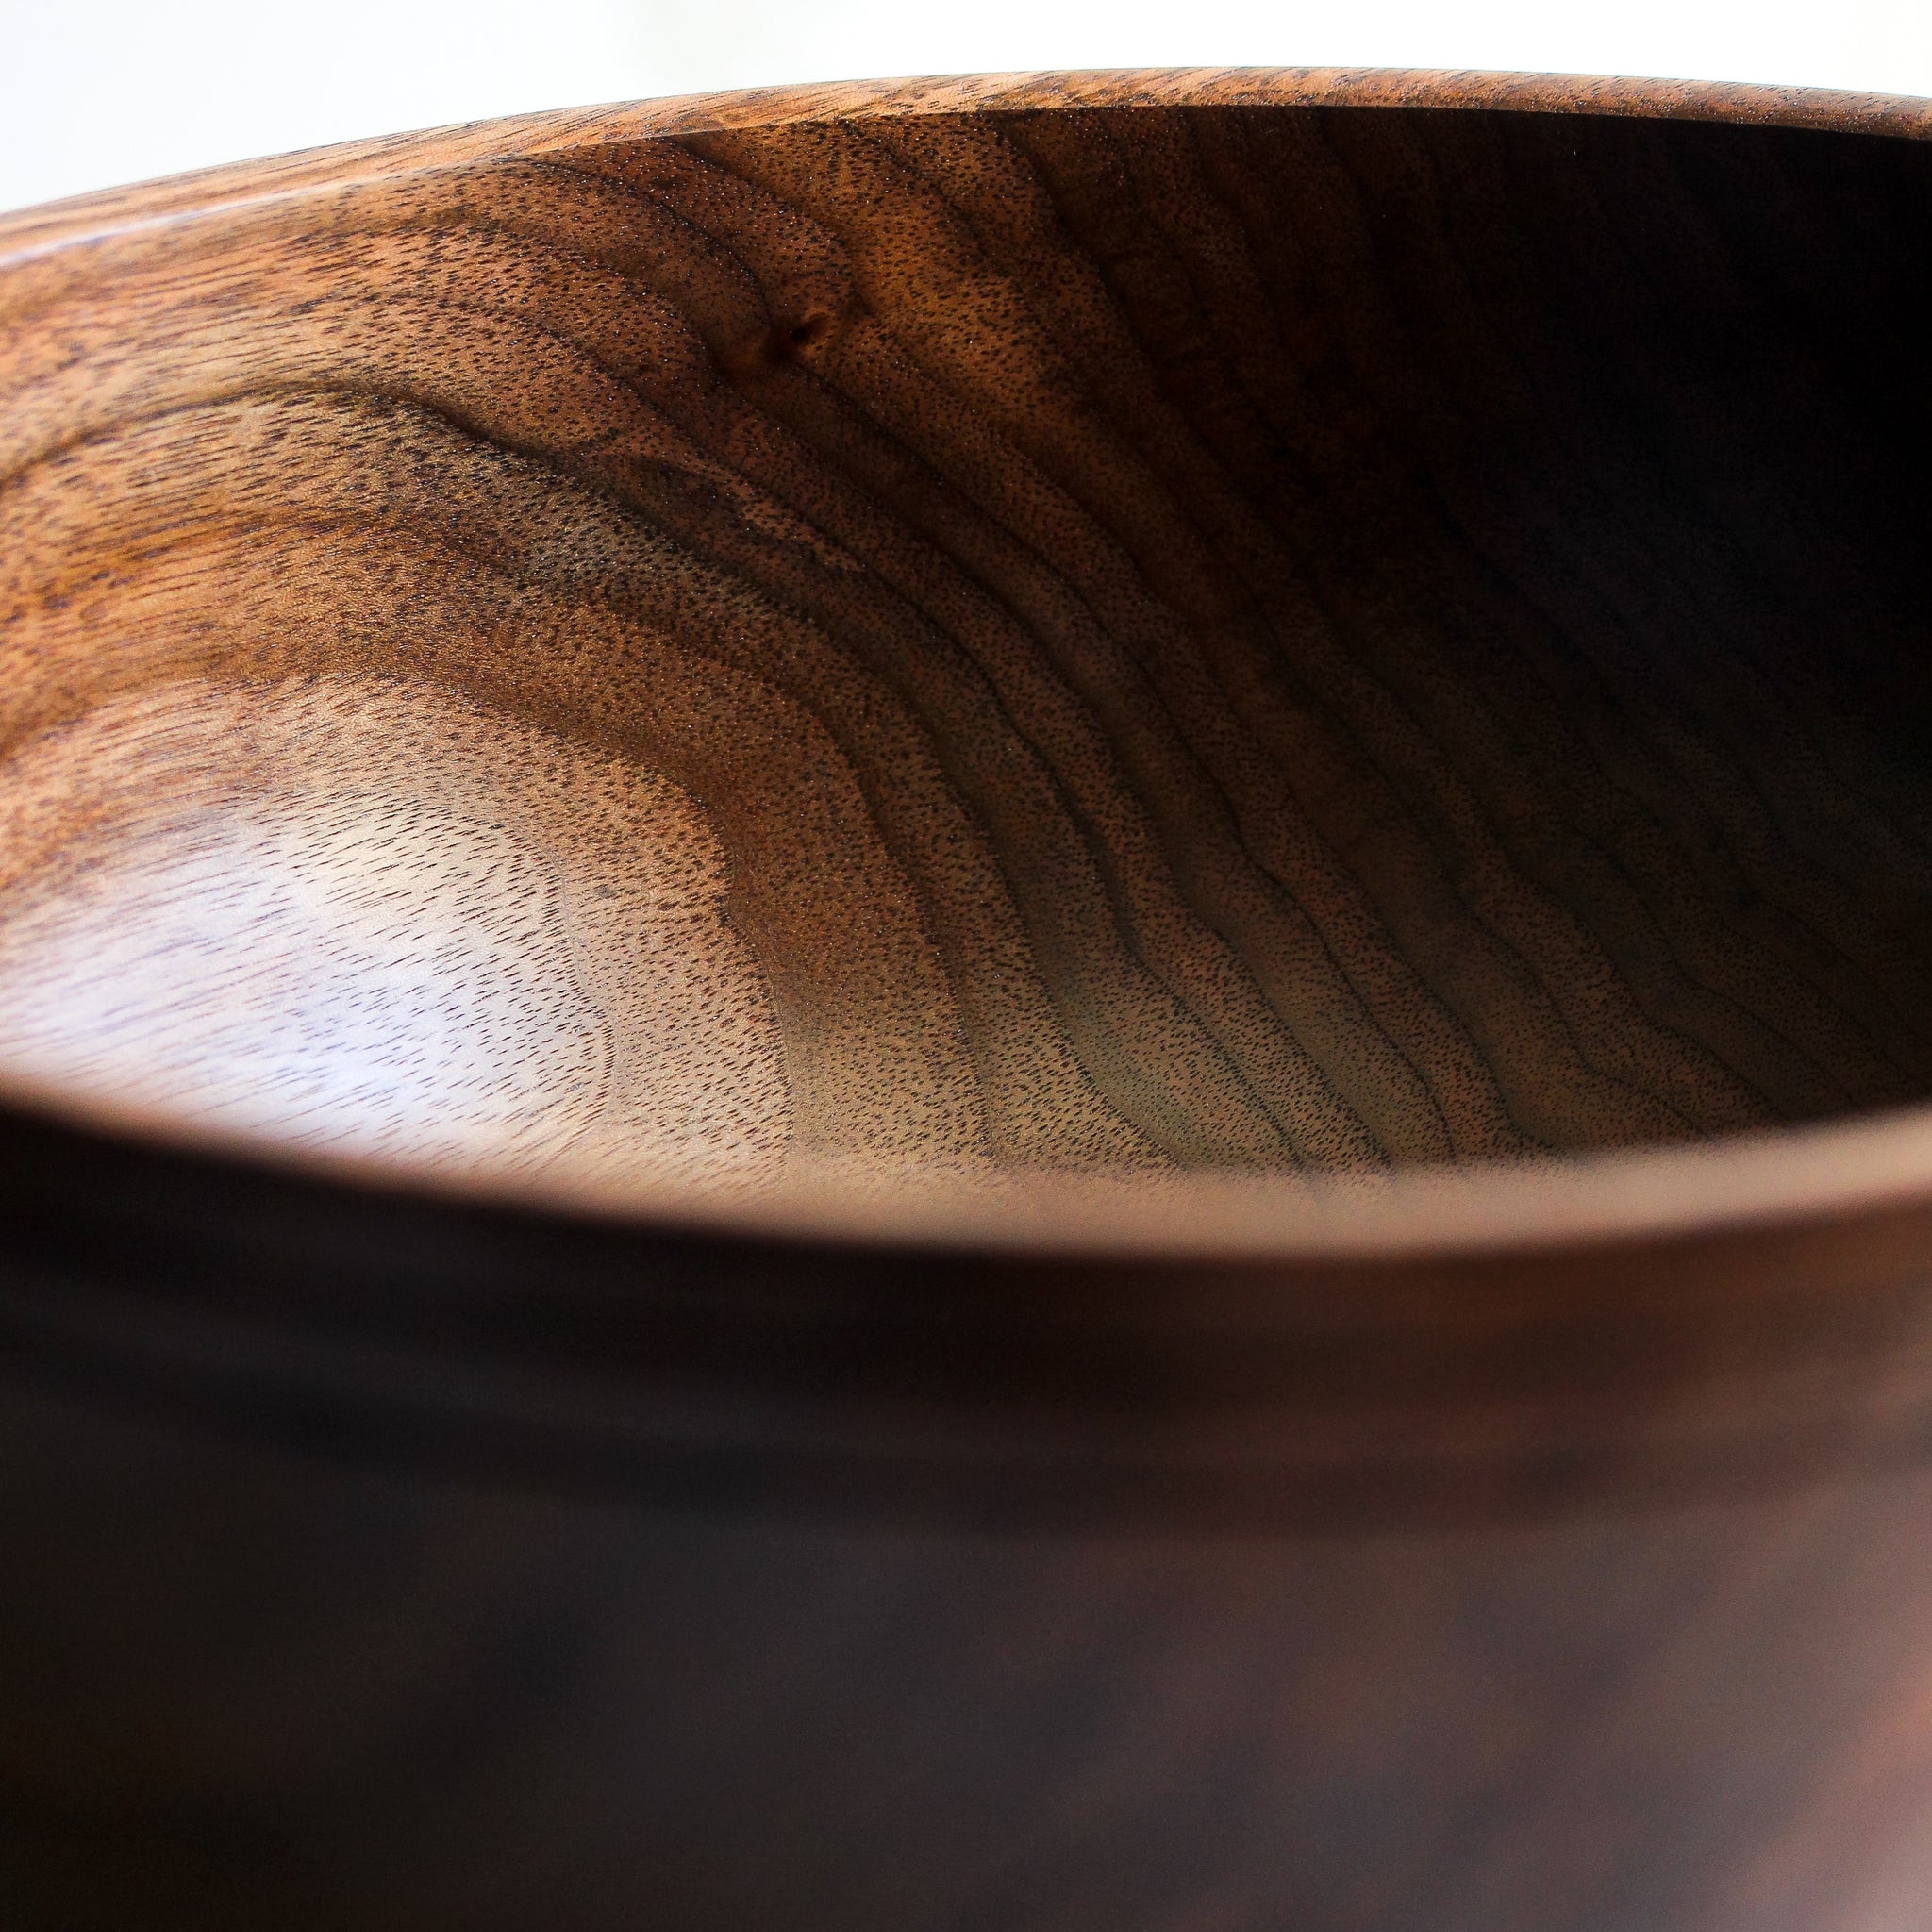 Black Walnut Dough Bowl with Grooved Rim